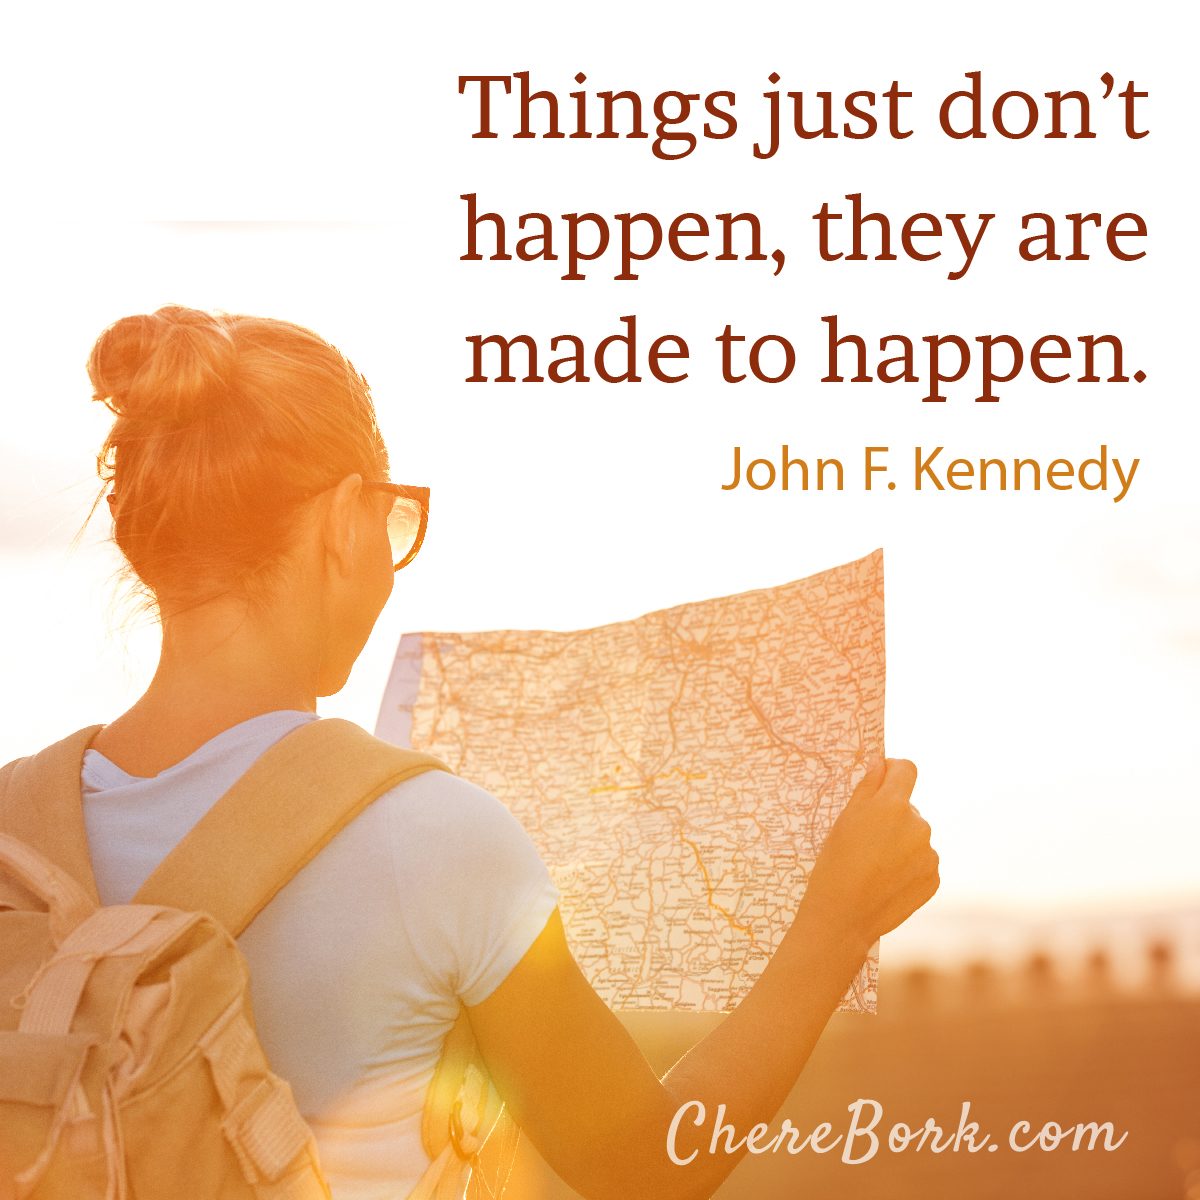 Things just don't happen, they are made to happen. -John F. Kennedy